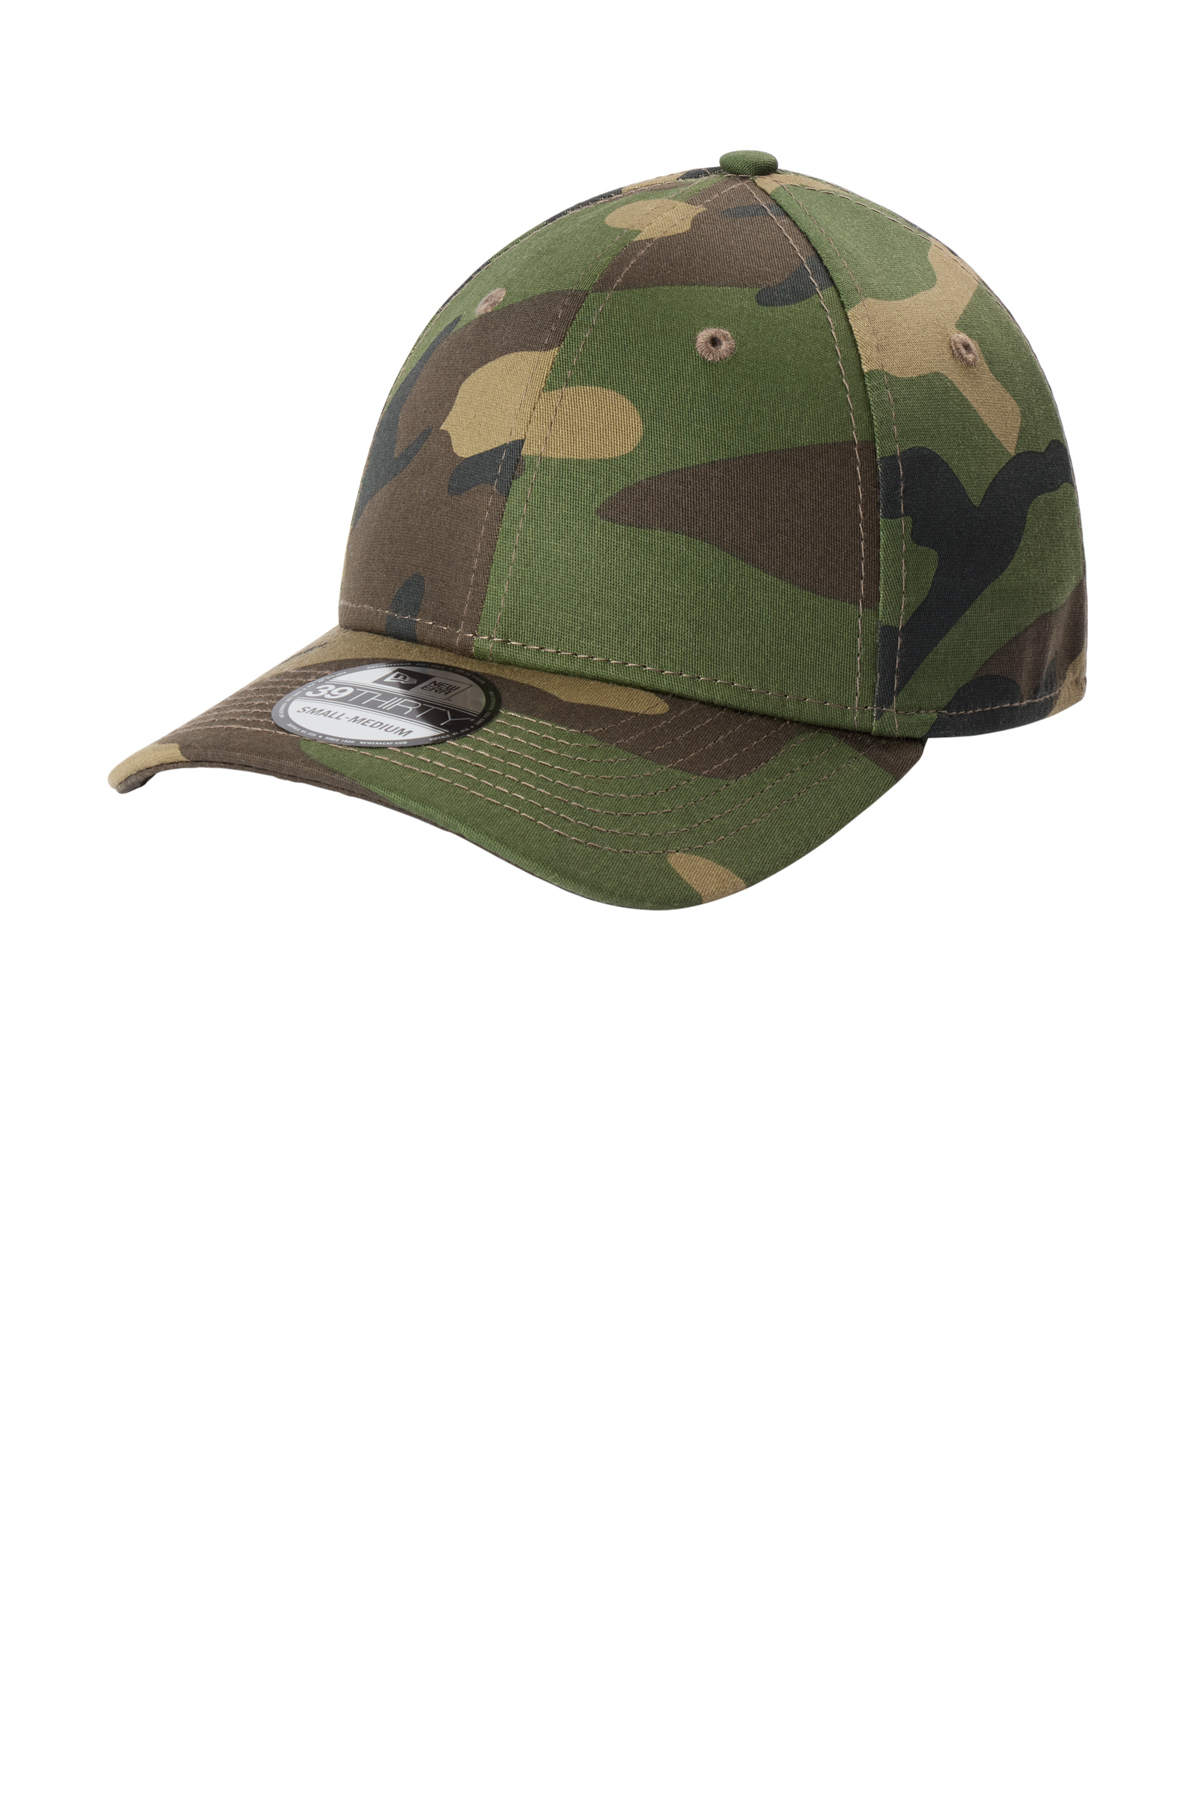 New Era - Structured Stretch Cotton Cap | Product | Company Casuals